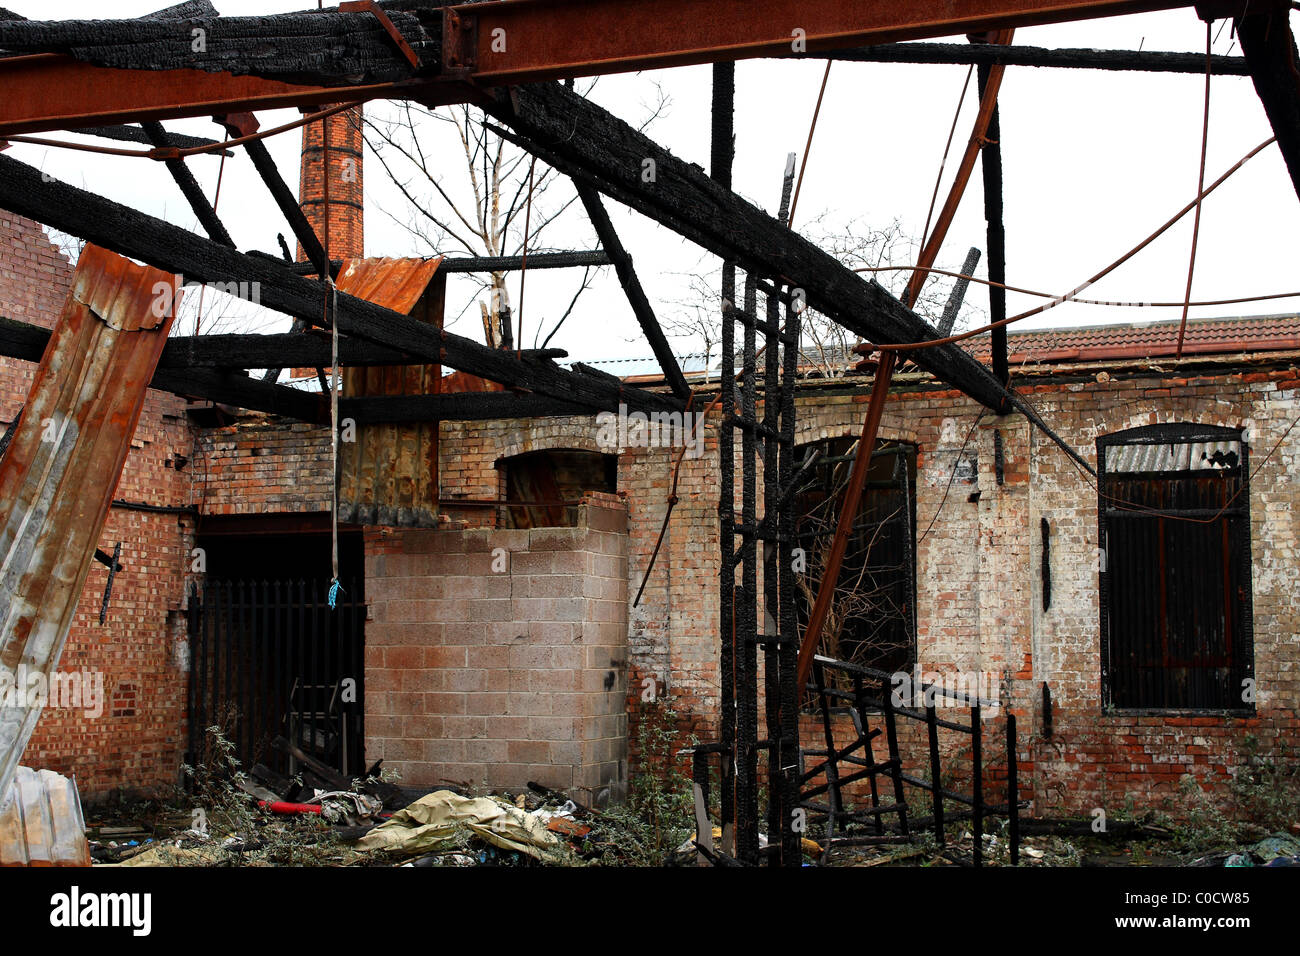 A fire damaged building, possibly burnt down by arson and vandalism. Stock Photo